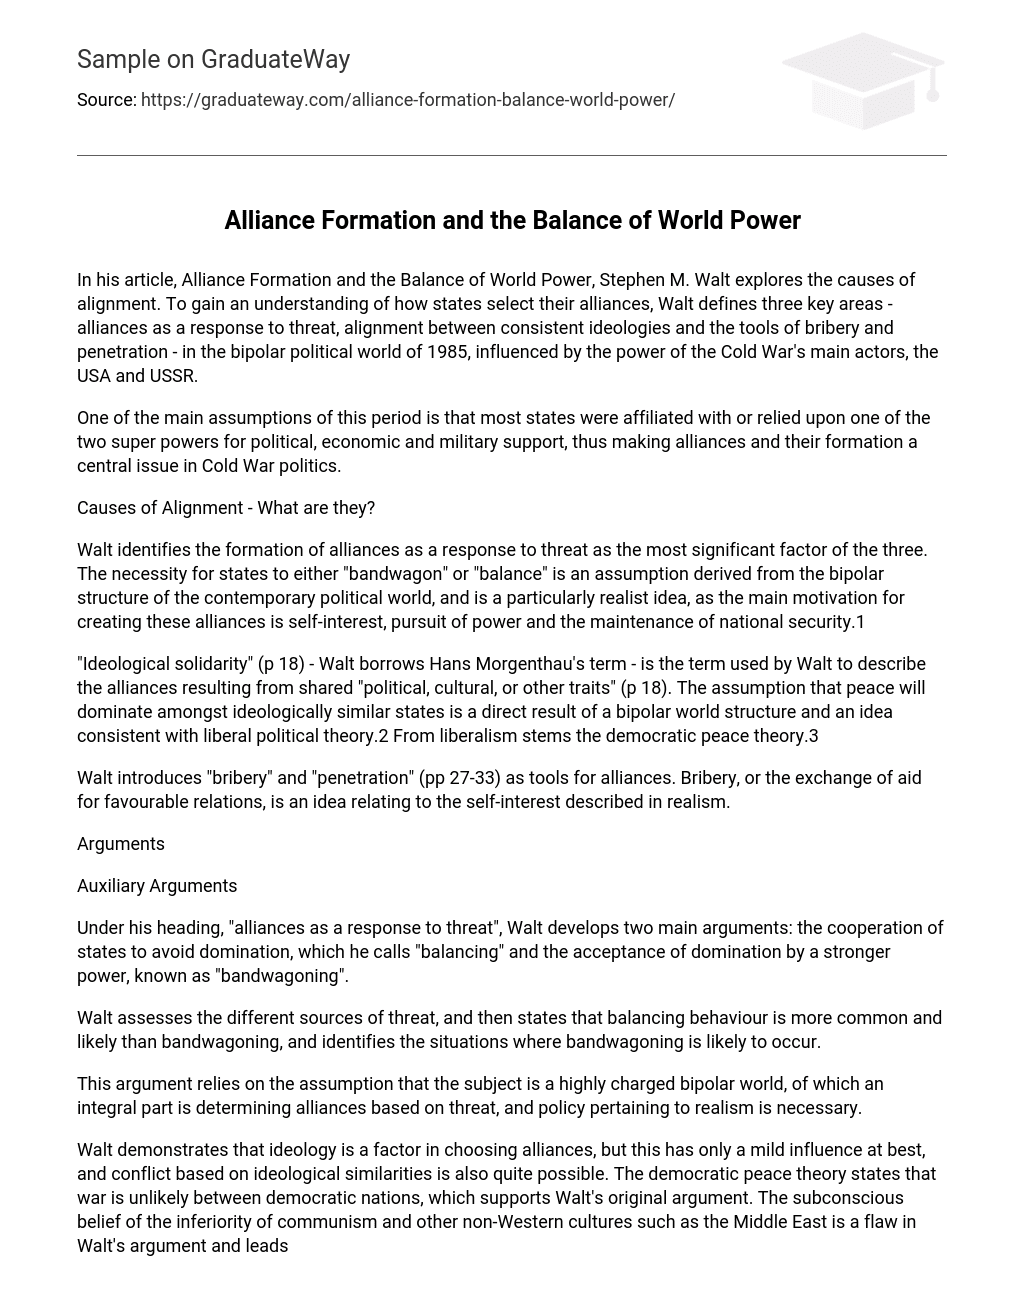 Alliance Formation and the Balance of World Power Short Summary